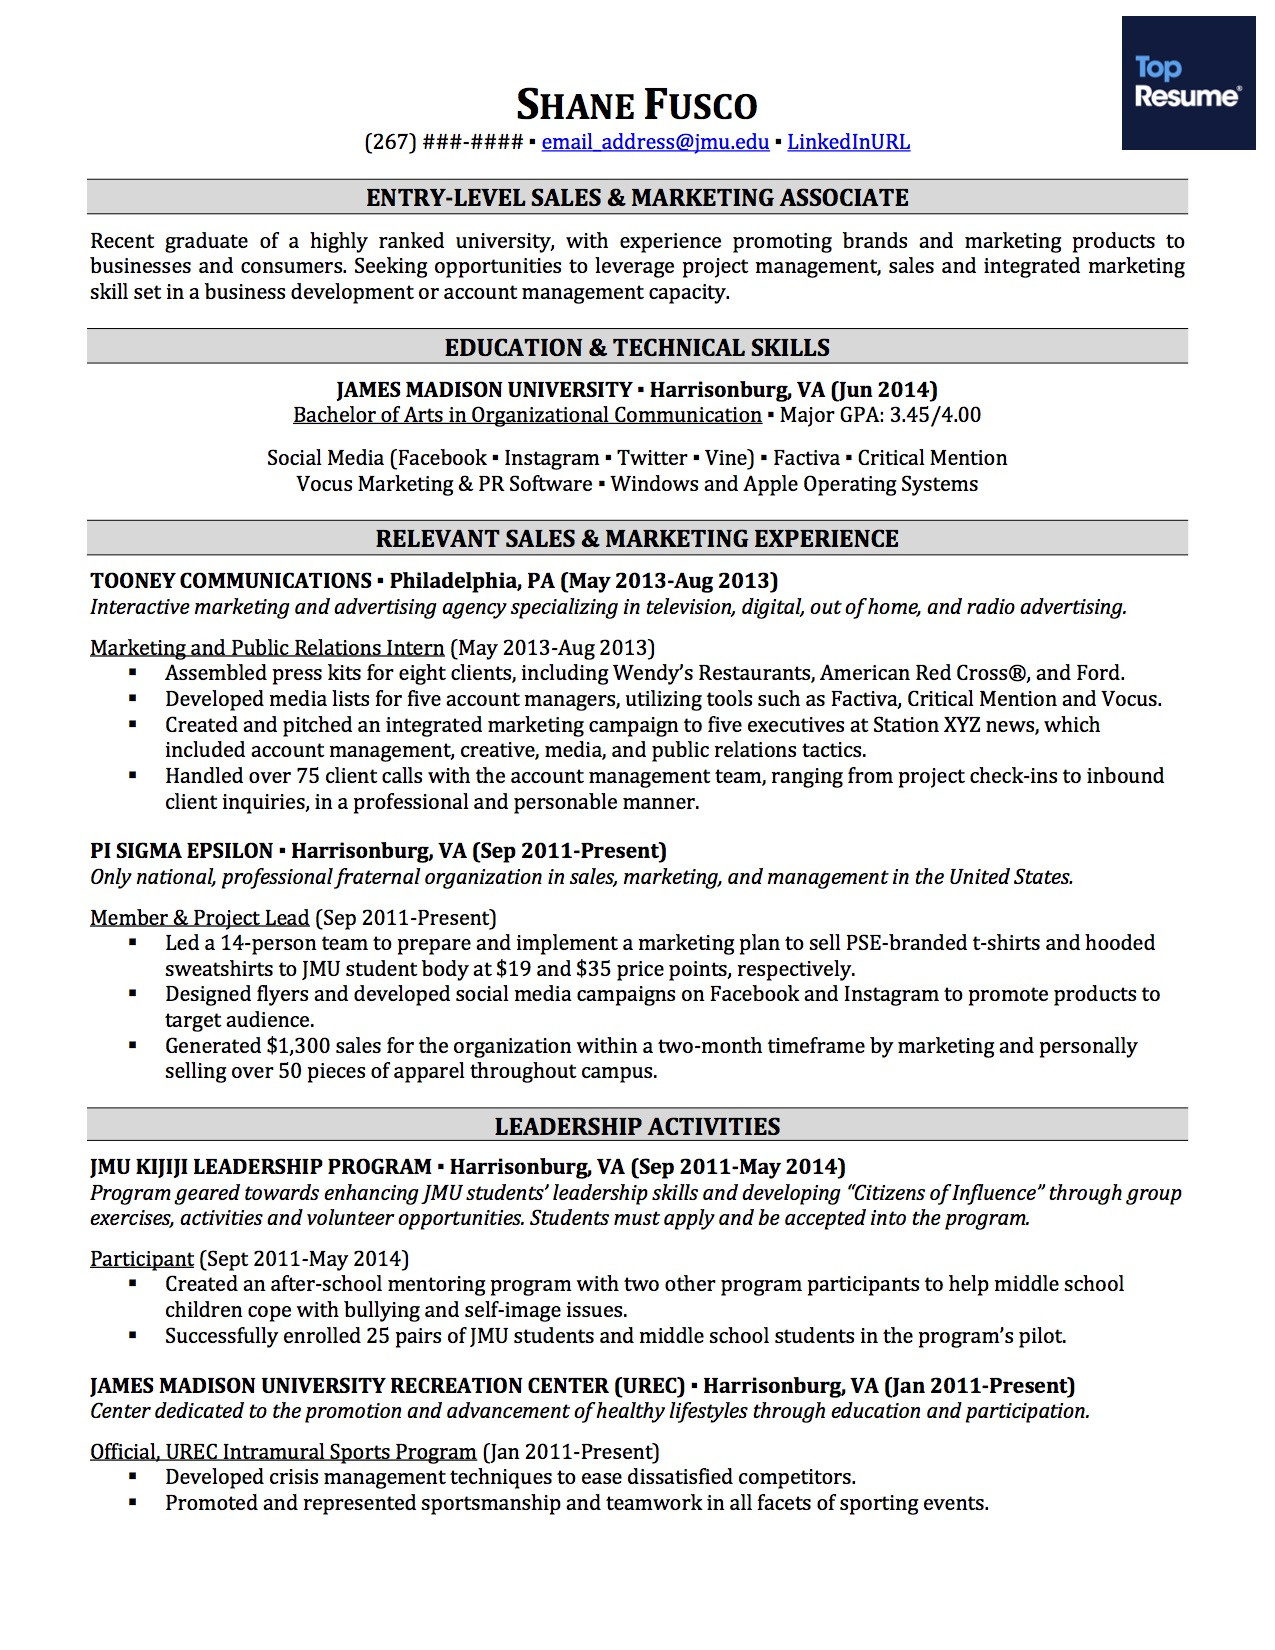 Sample Resume High School Applying for Job No Experience How to Make A Great Resume with No Experience topresume